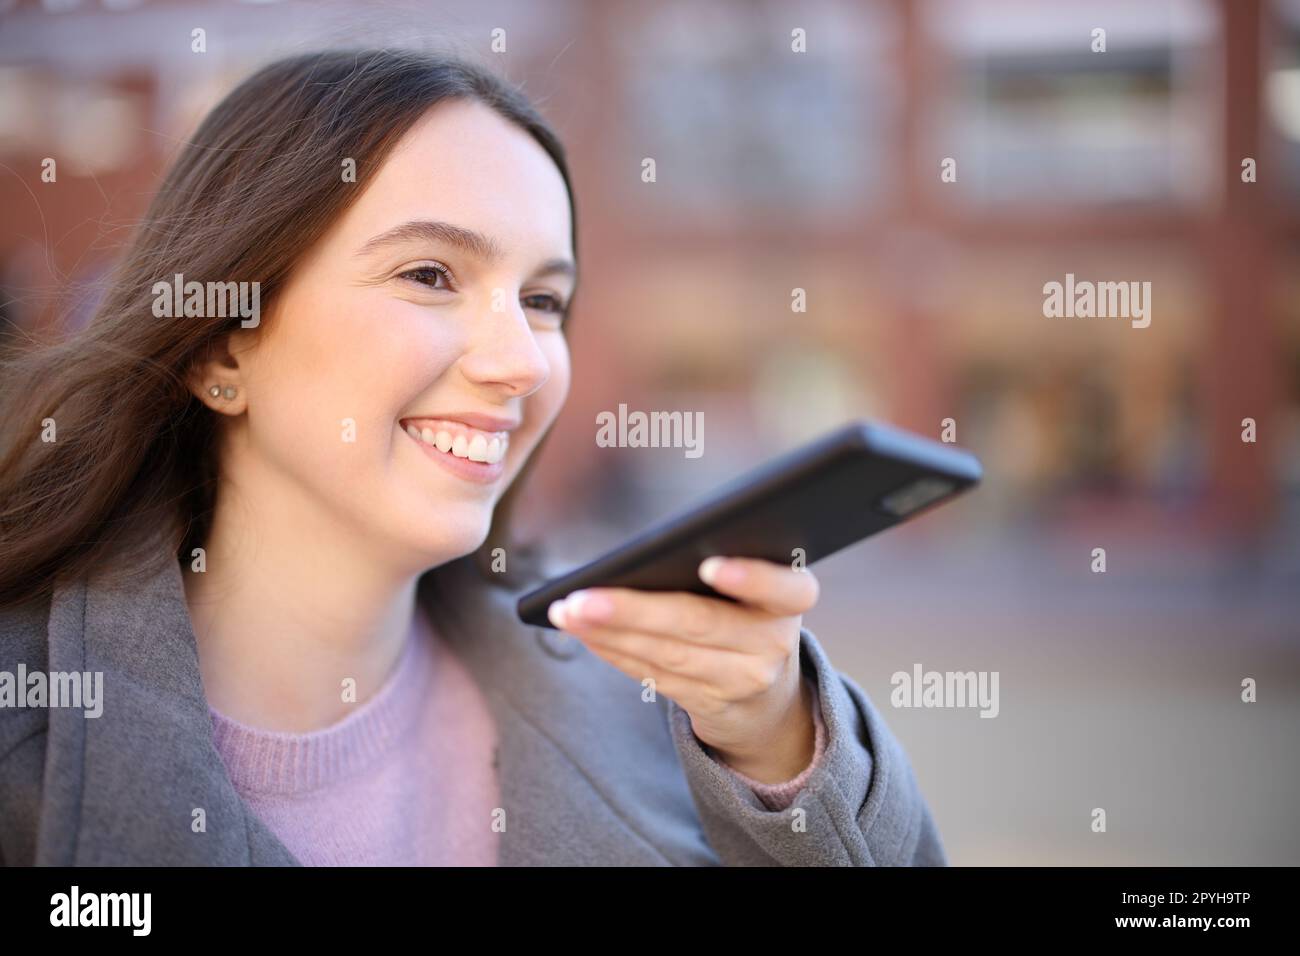 Happy woman in winter dictating on phone Stock Photo